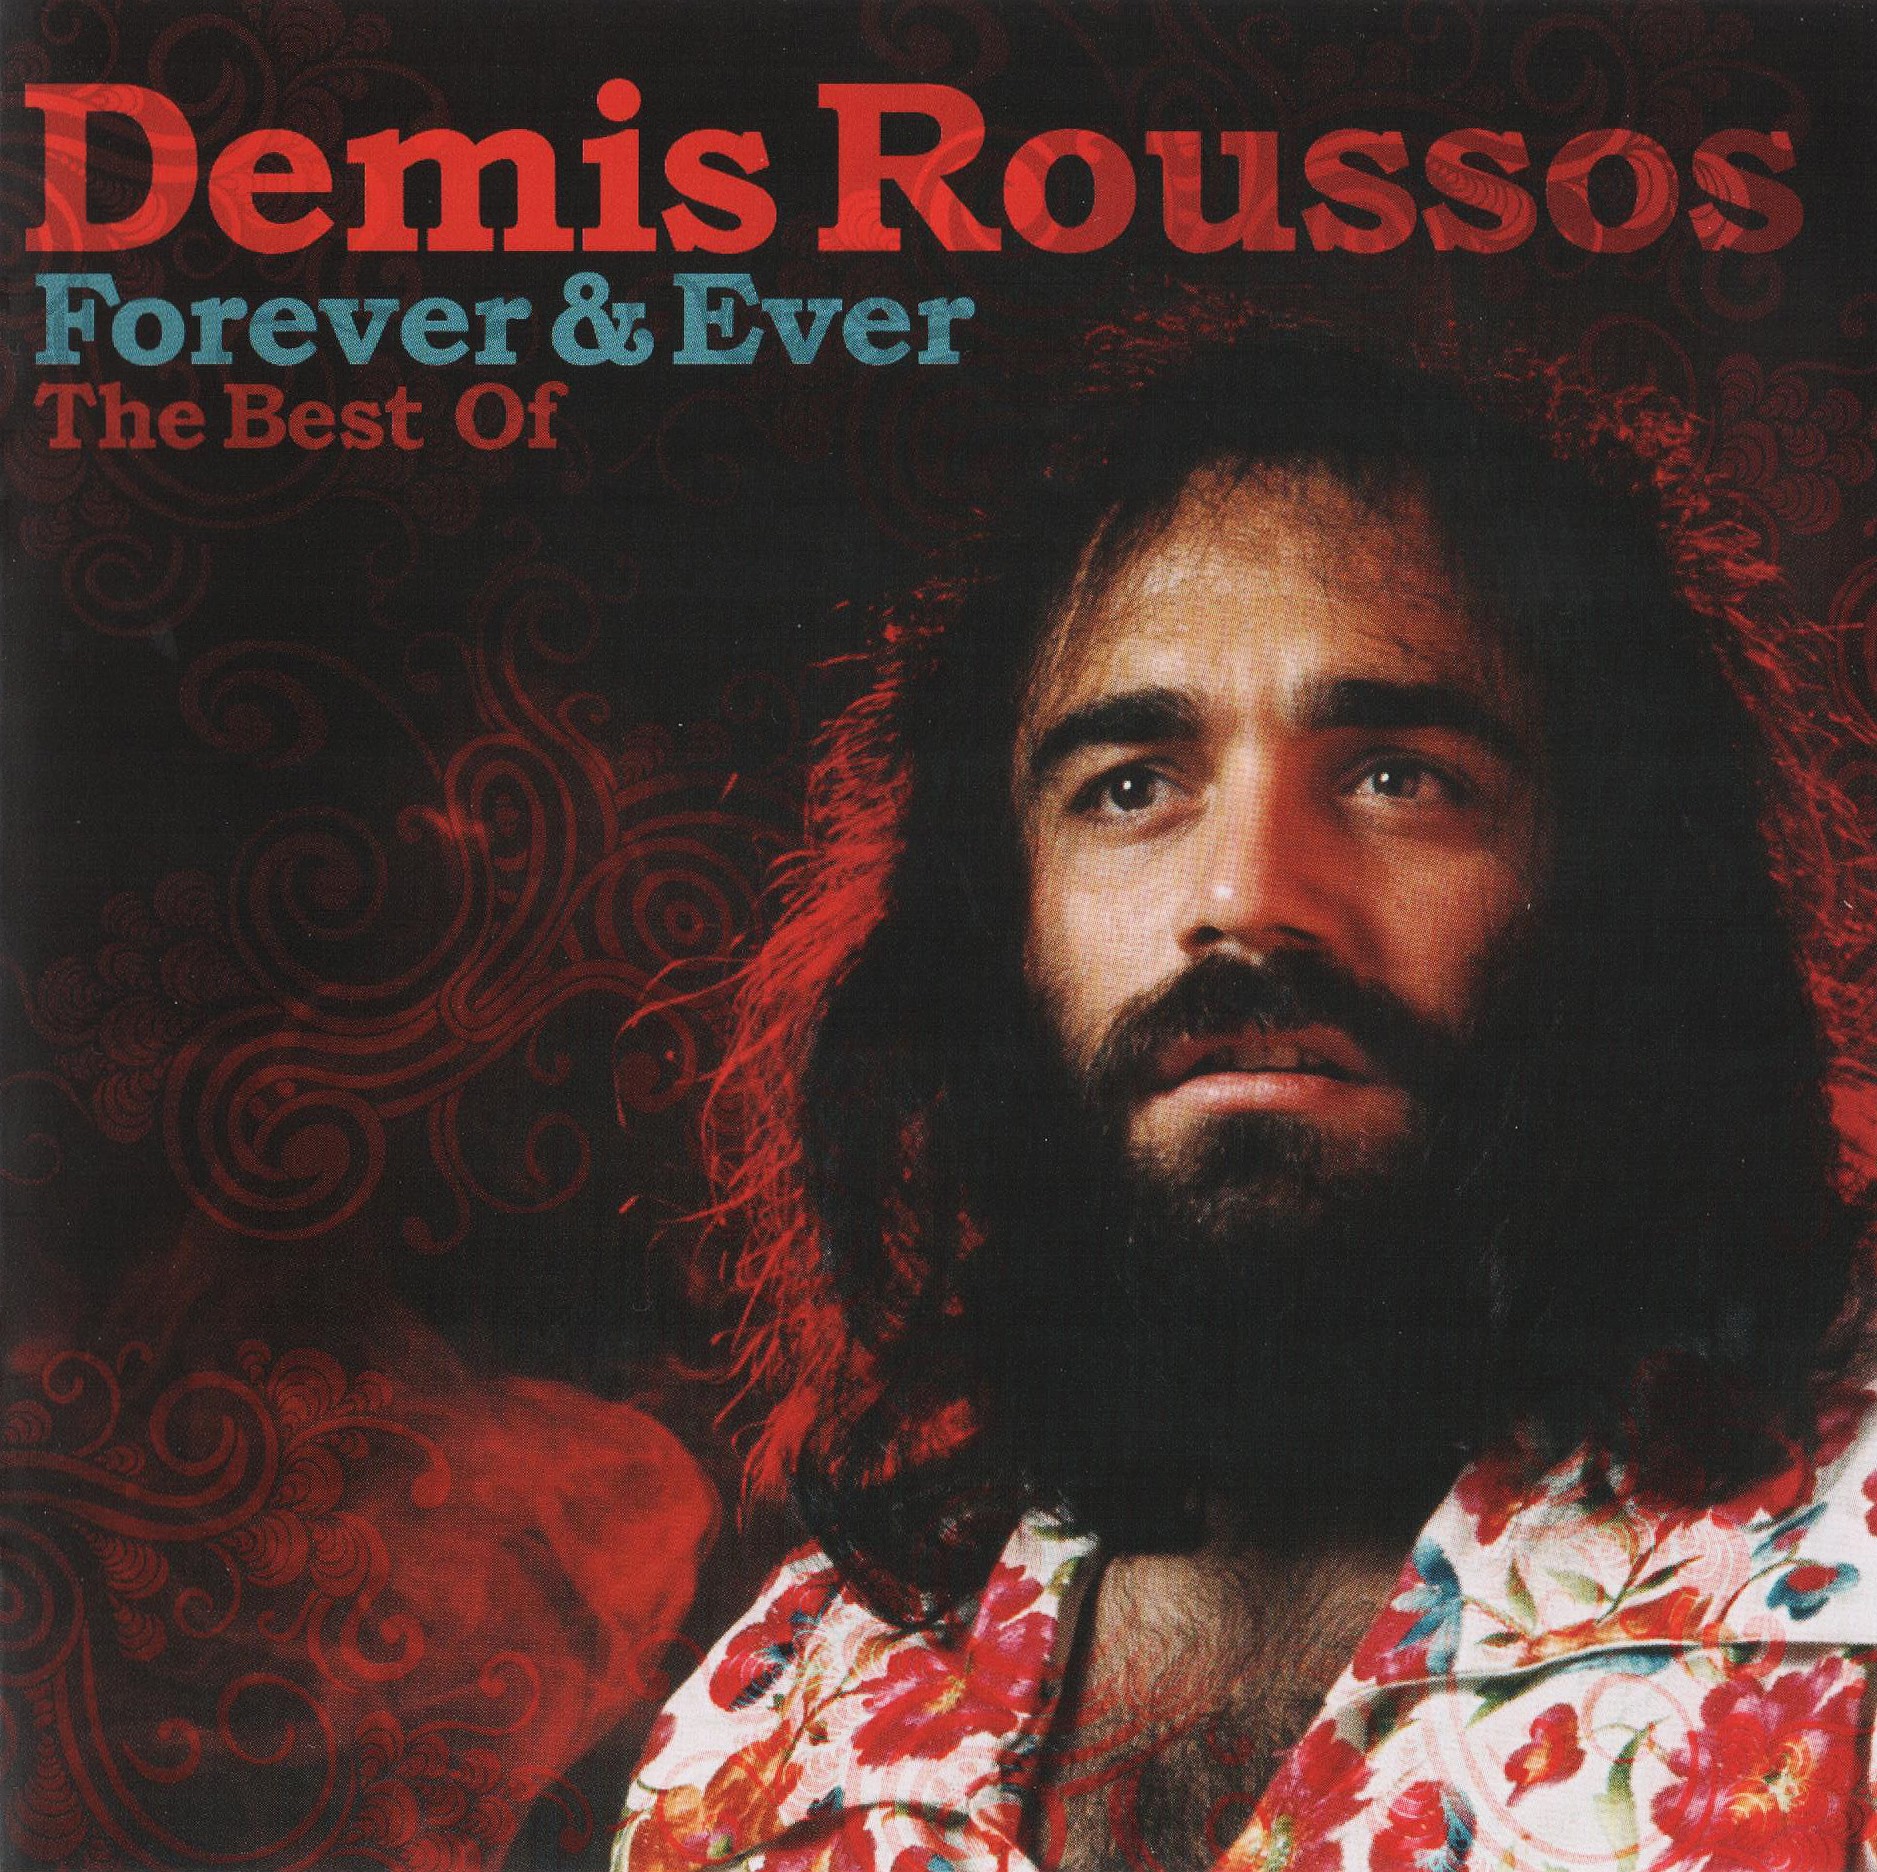 Demis Roussos Forever And Ever Demis Roussos - Forever & Ever: The Best Of (2013) / AvaxHome